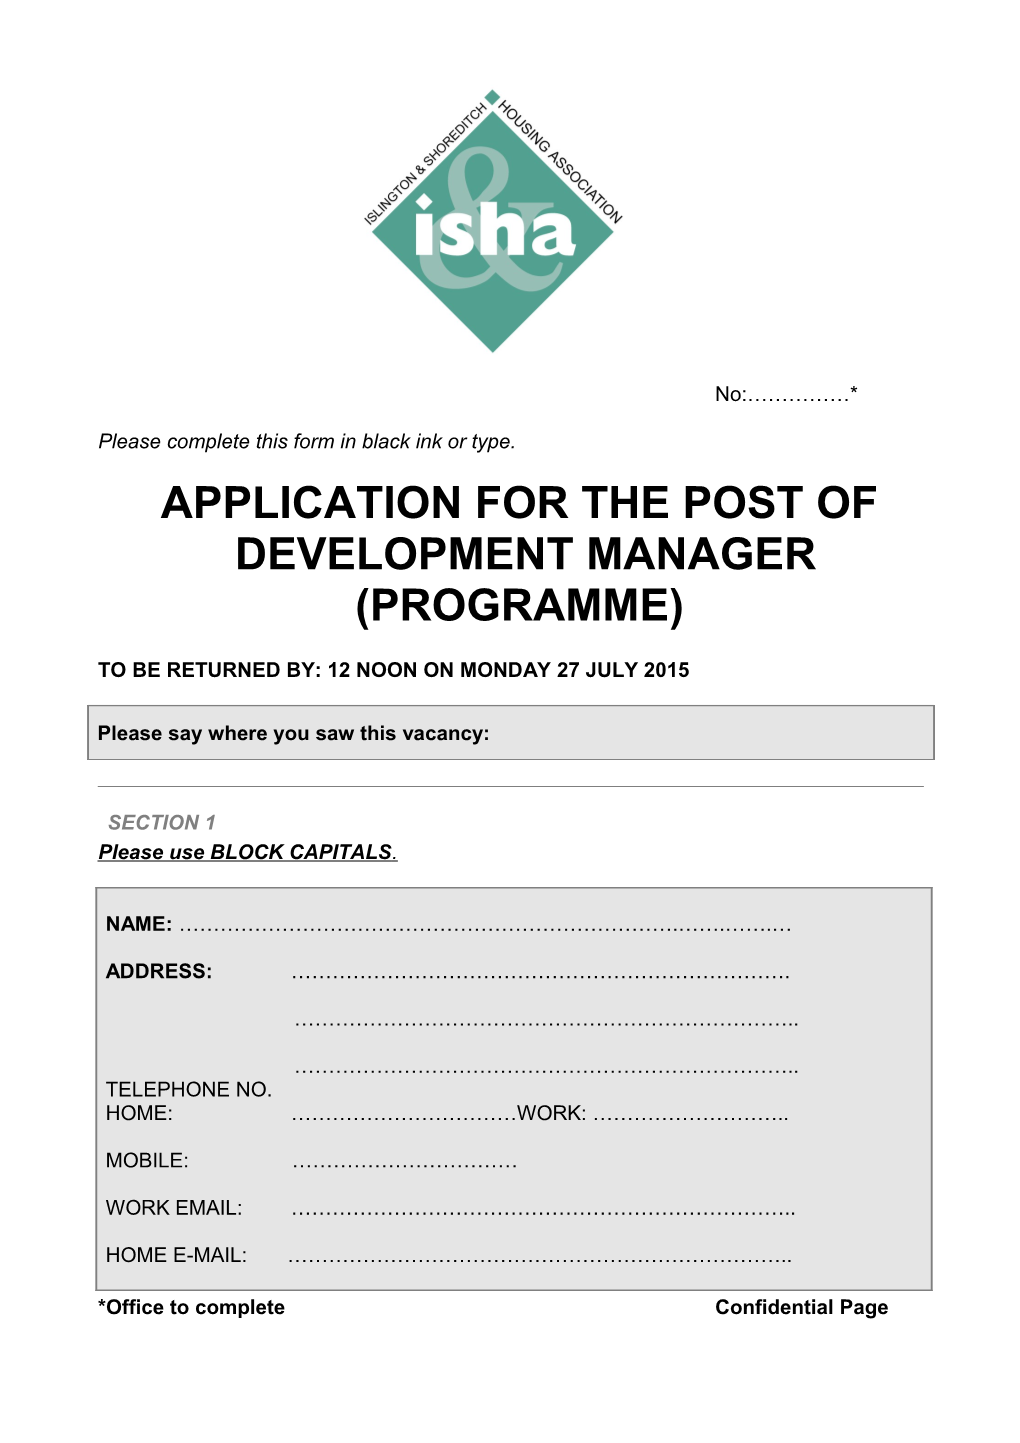 Application for the Post Ofdevelopment Manager (Programme)